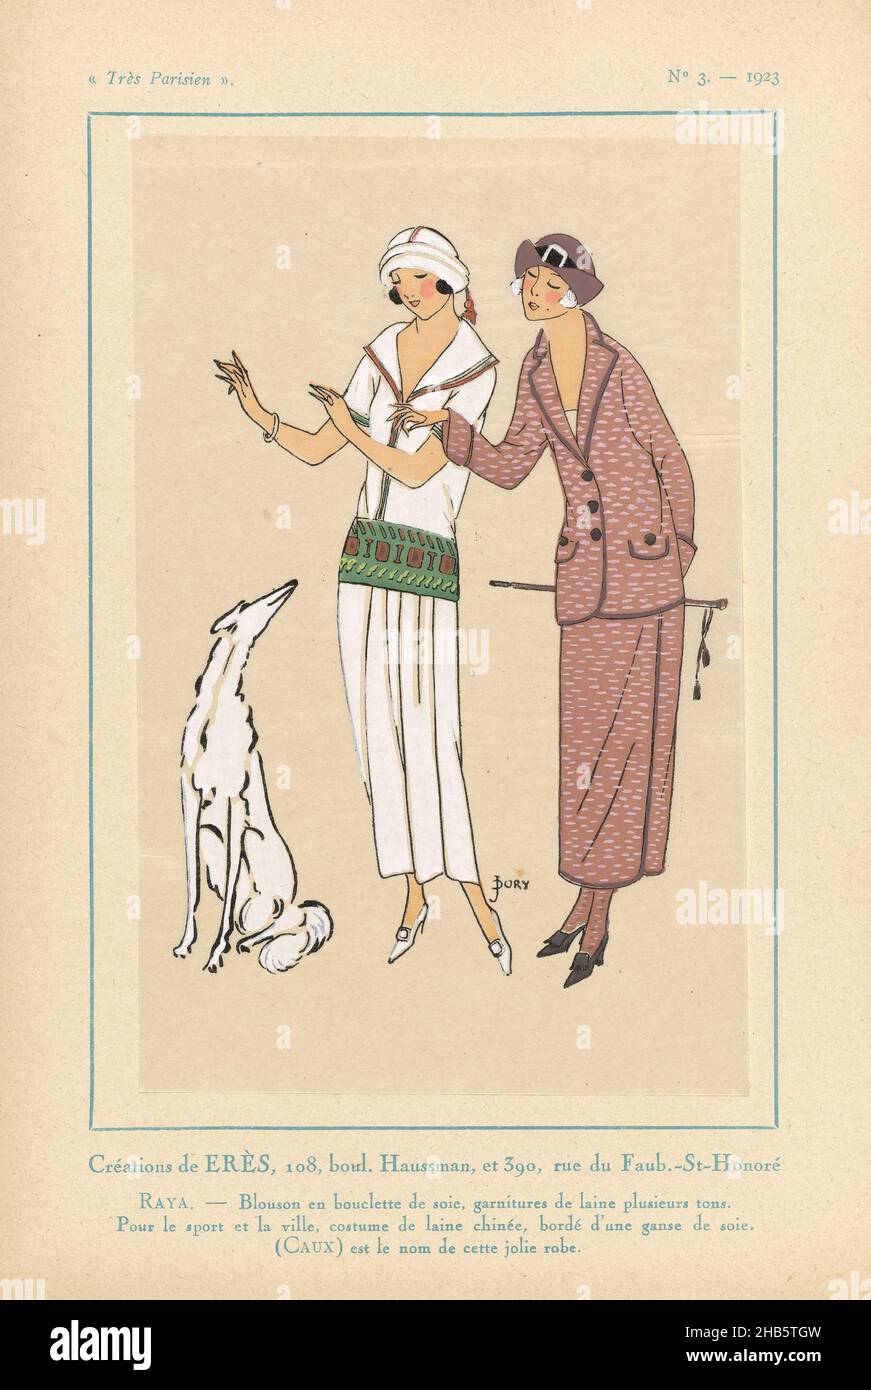 Très Parisien, 1923, No. 3: Créations de ERÈS...RAYA..., Designs by Erès. Jacket of bouclé silk with trimmings of wool in various shades. For sport and the city, a costume (cloak) of 'laine chinée' trimmed with silk cord. According to the caption, (CAUX) is the name of this nice dress. Accessories: hat with hatband and buckle(?), walking stick with tassels, bracelet, pumps. Print from the fashion magazine Très Parisien (1920-1936)., J. Dory (mentioned on object), print maker: anonymous, Paris, 1923, paper, letterpress printing, height 269 mm × width 180 mm Stock Photo